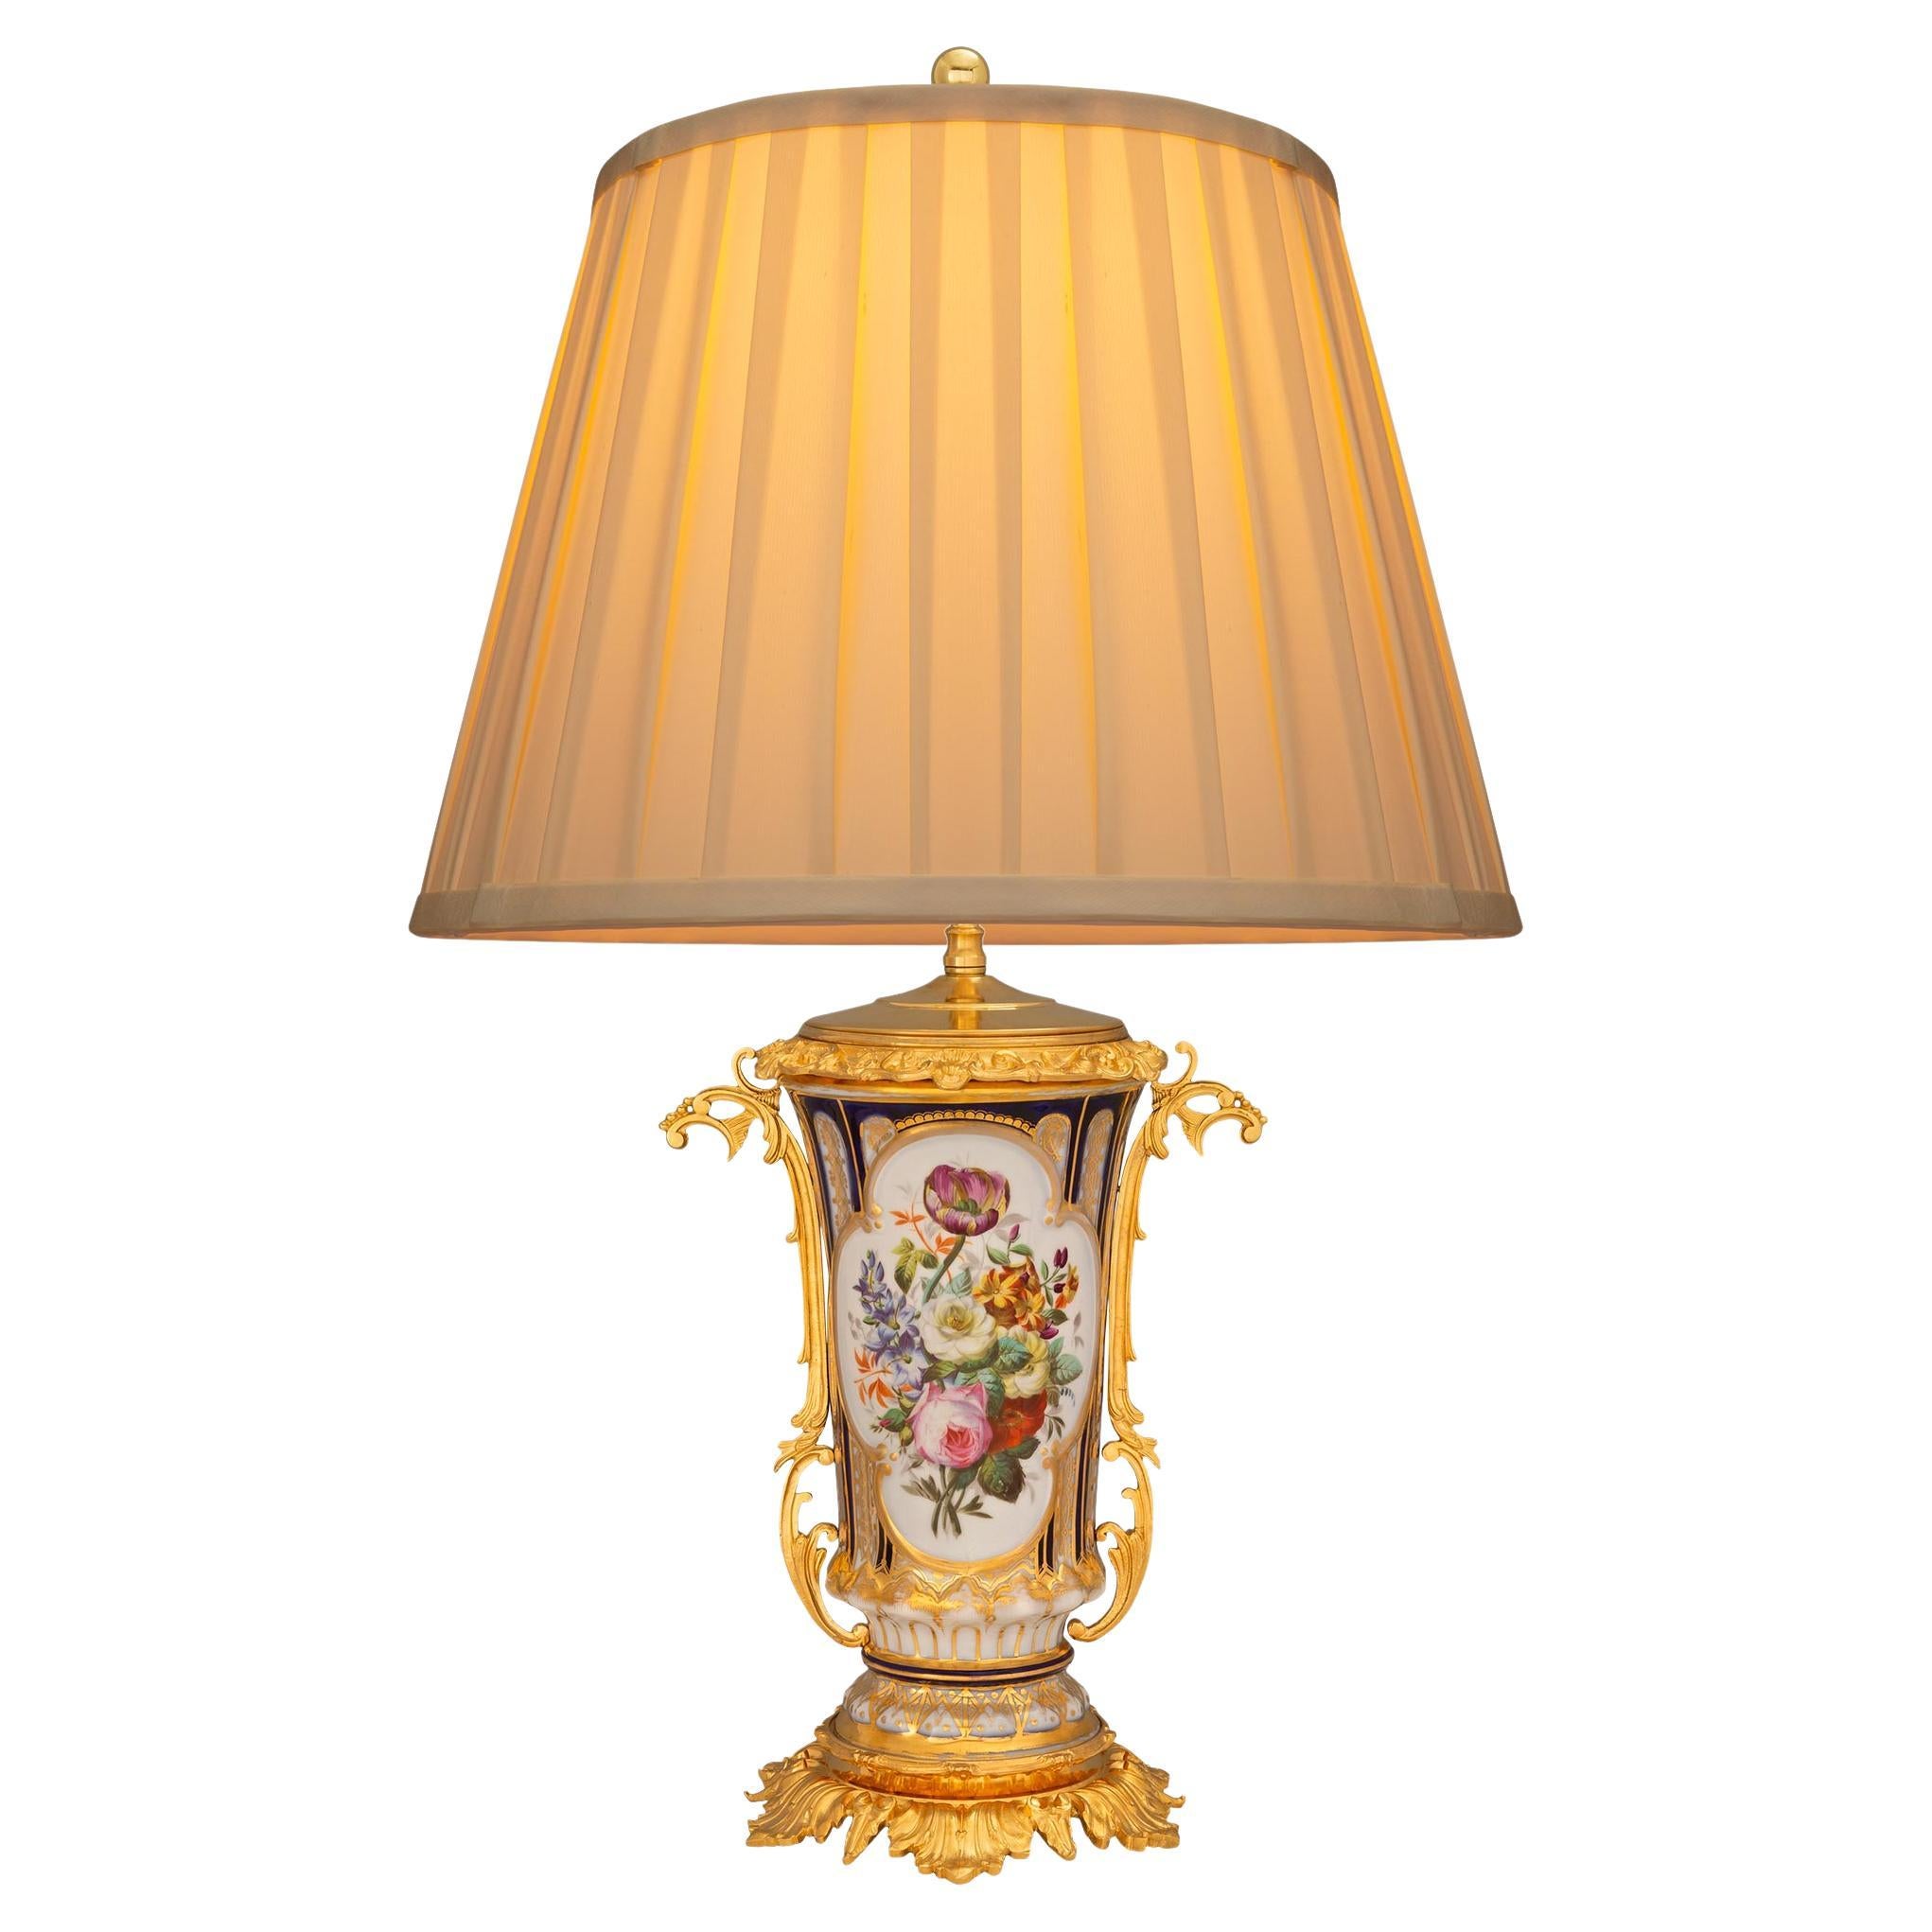 Continental 19th Century Louis XV St. Porcelain And Ormolu Lamp